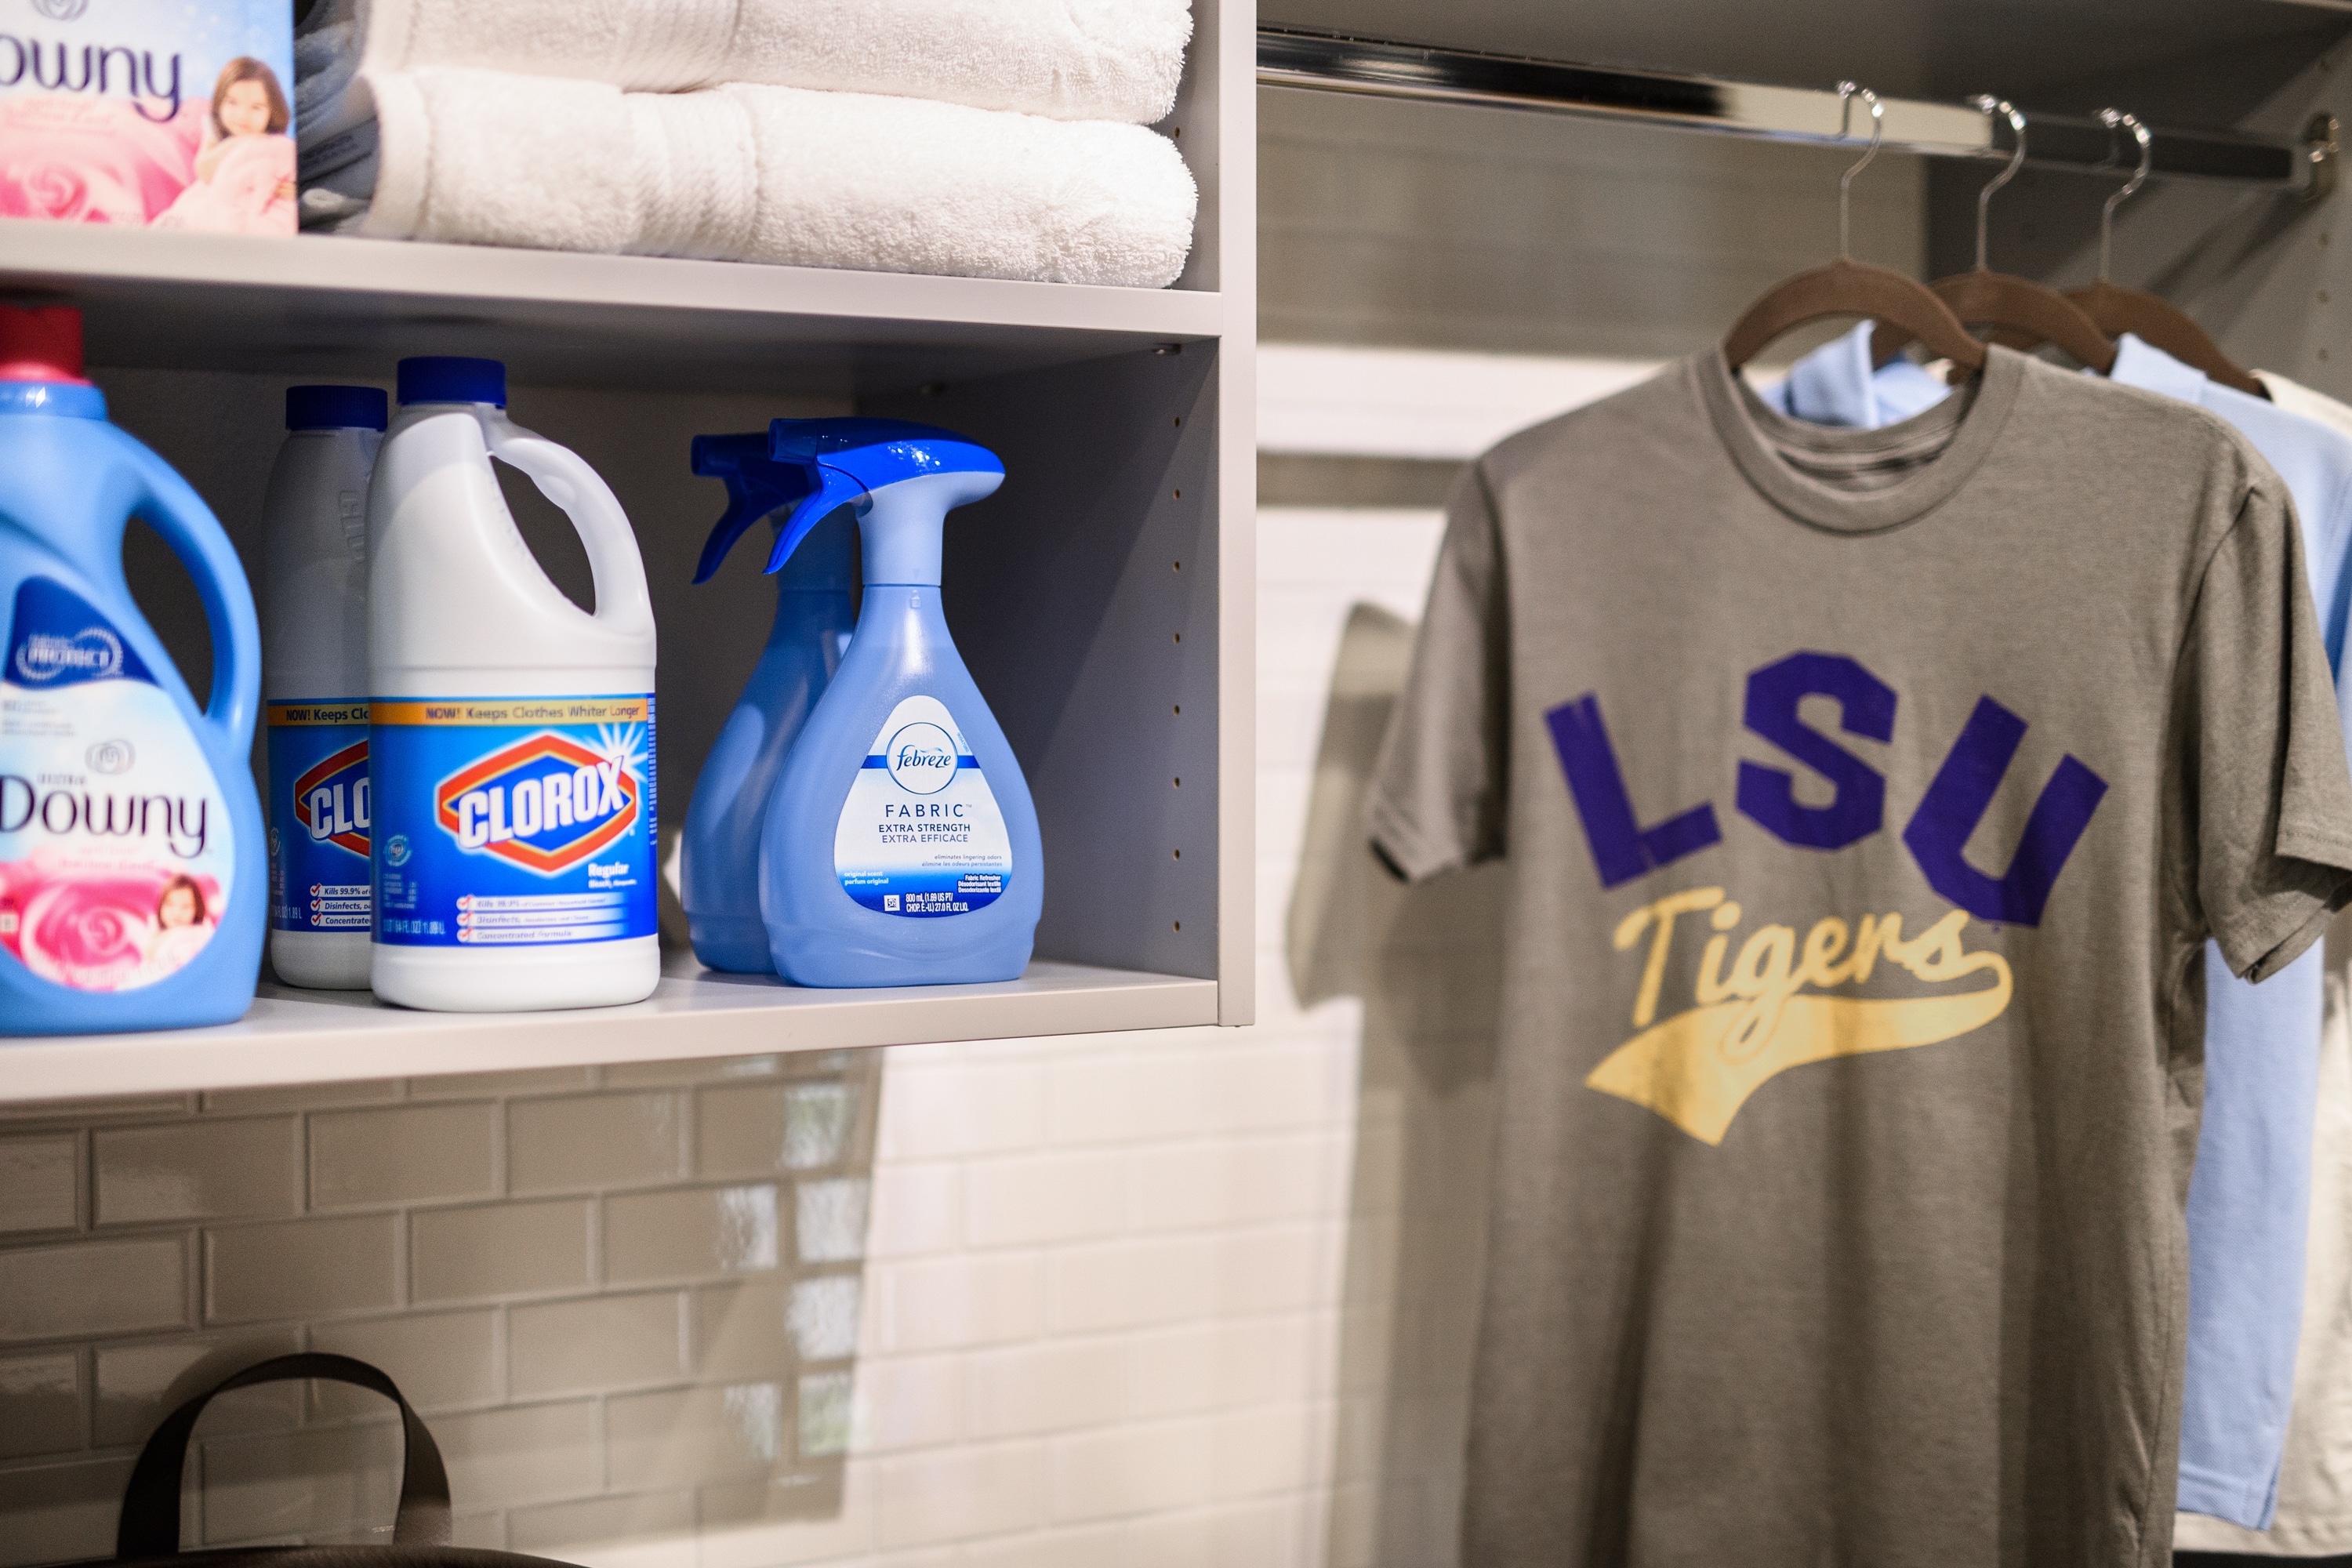 laundry closet with cleaning supplies on shelves and t shirts on rack